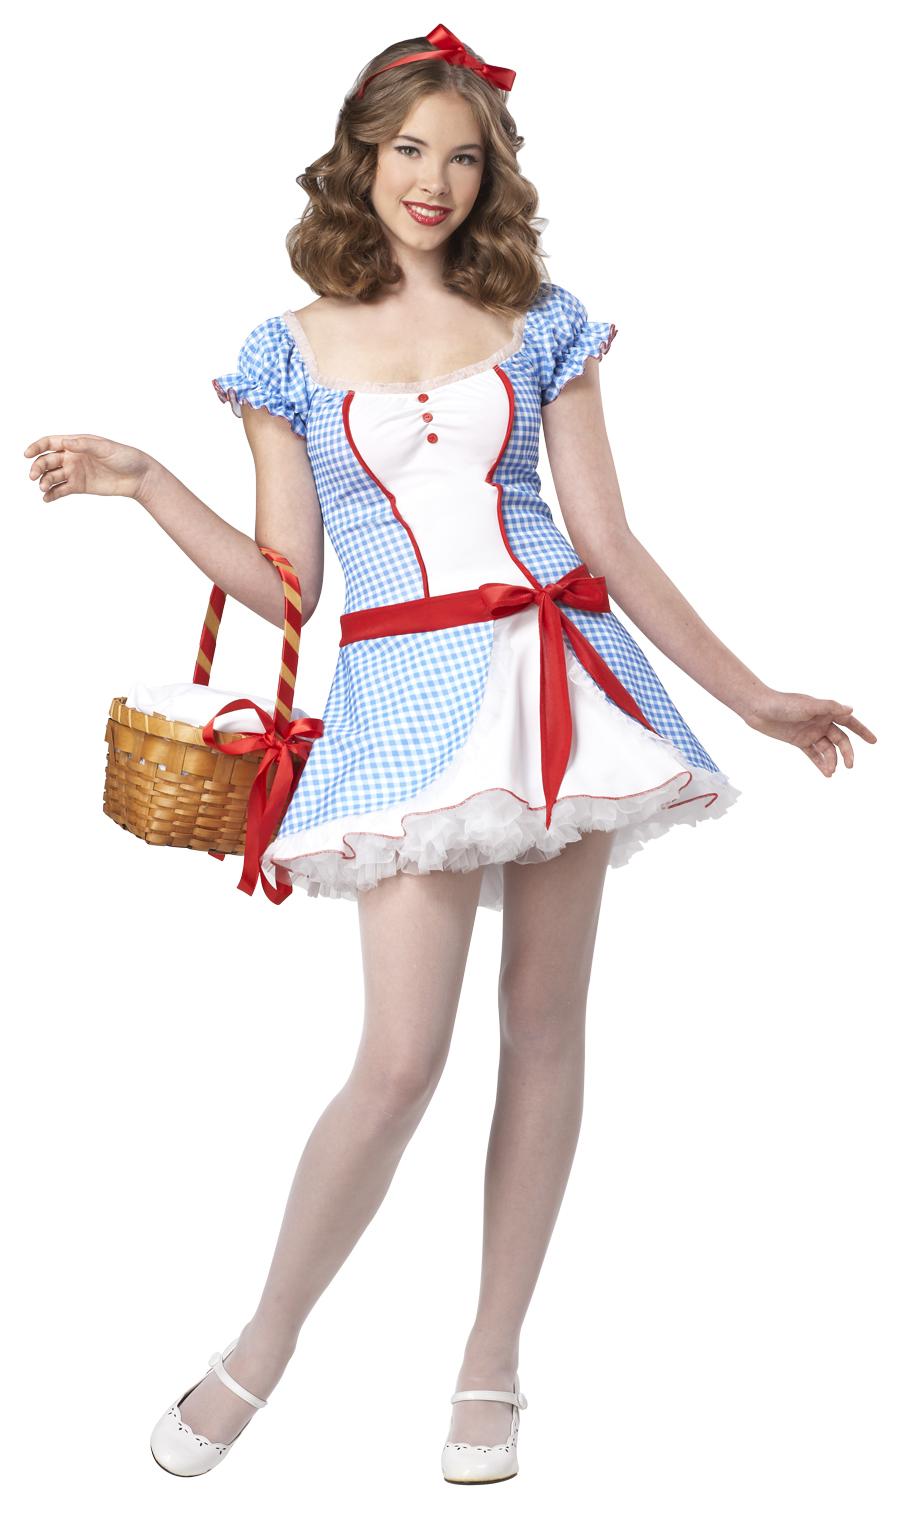 Dorothy the Wizard of Oz Costume.